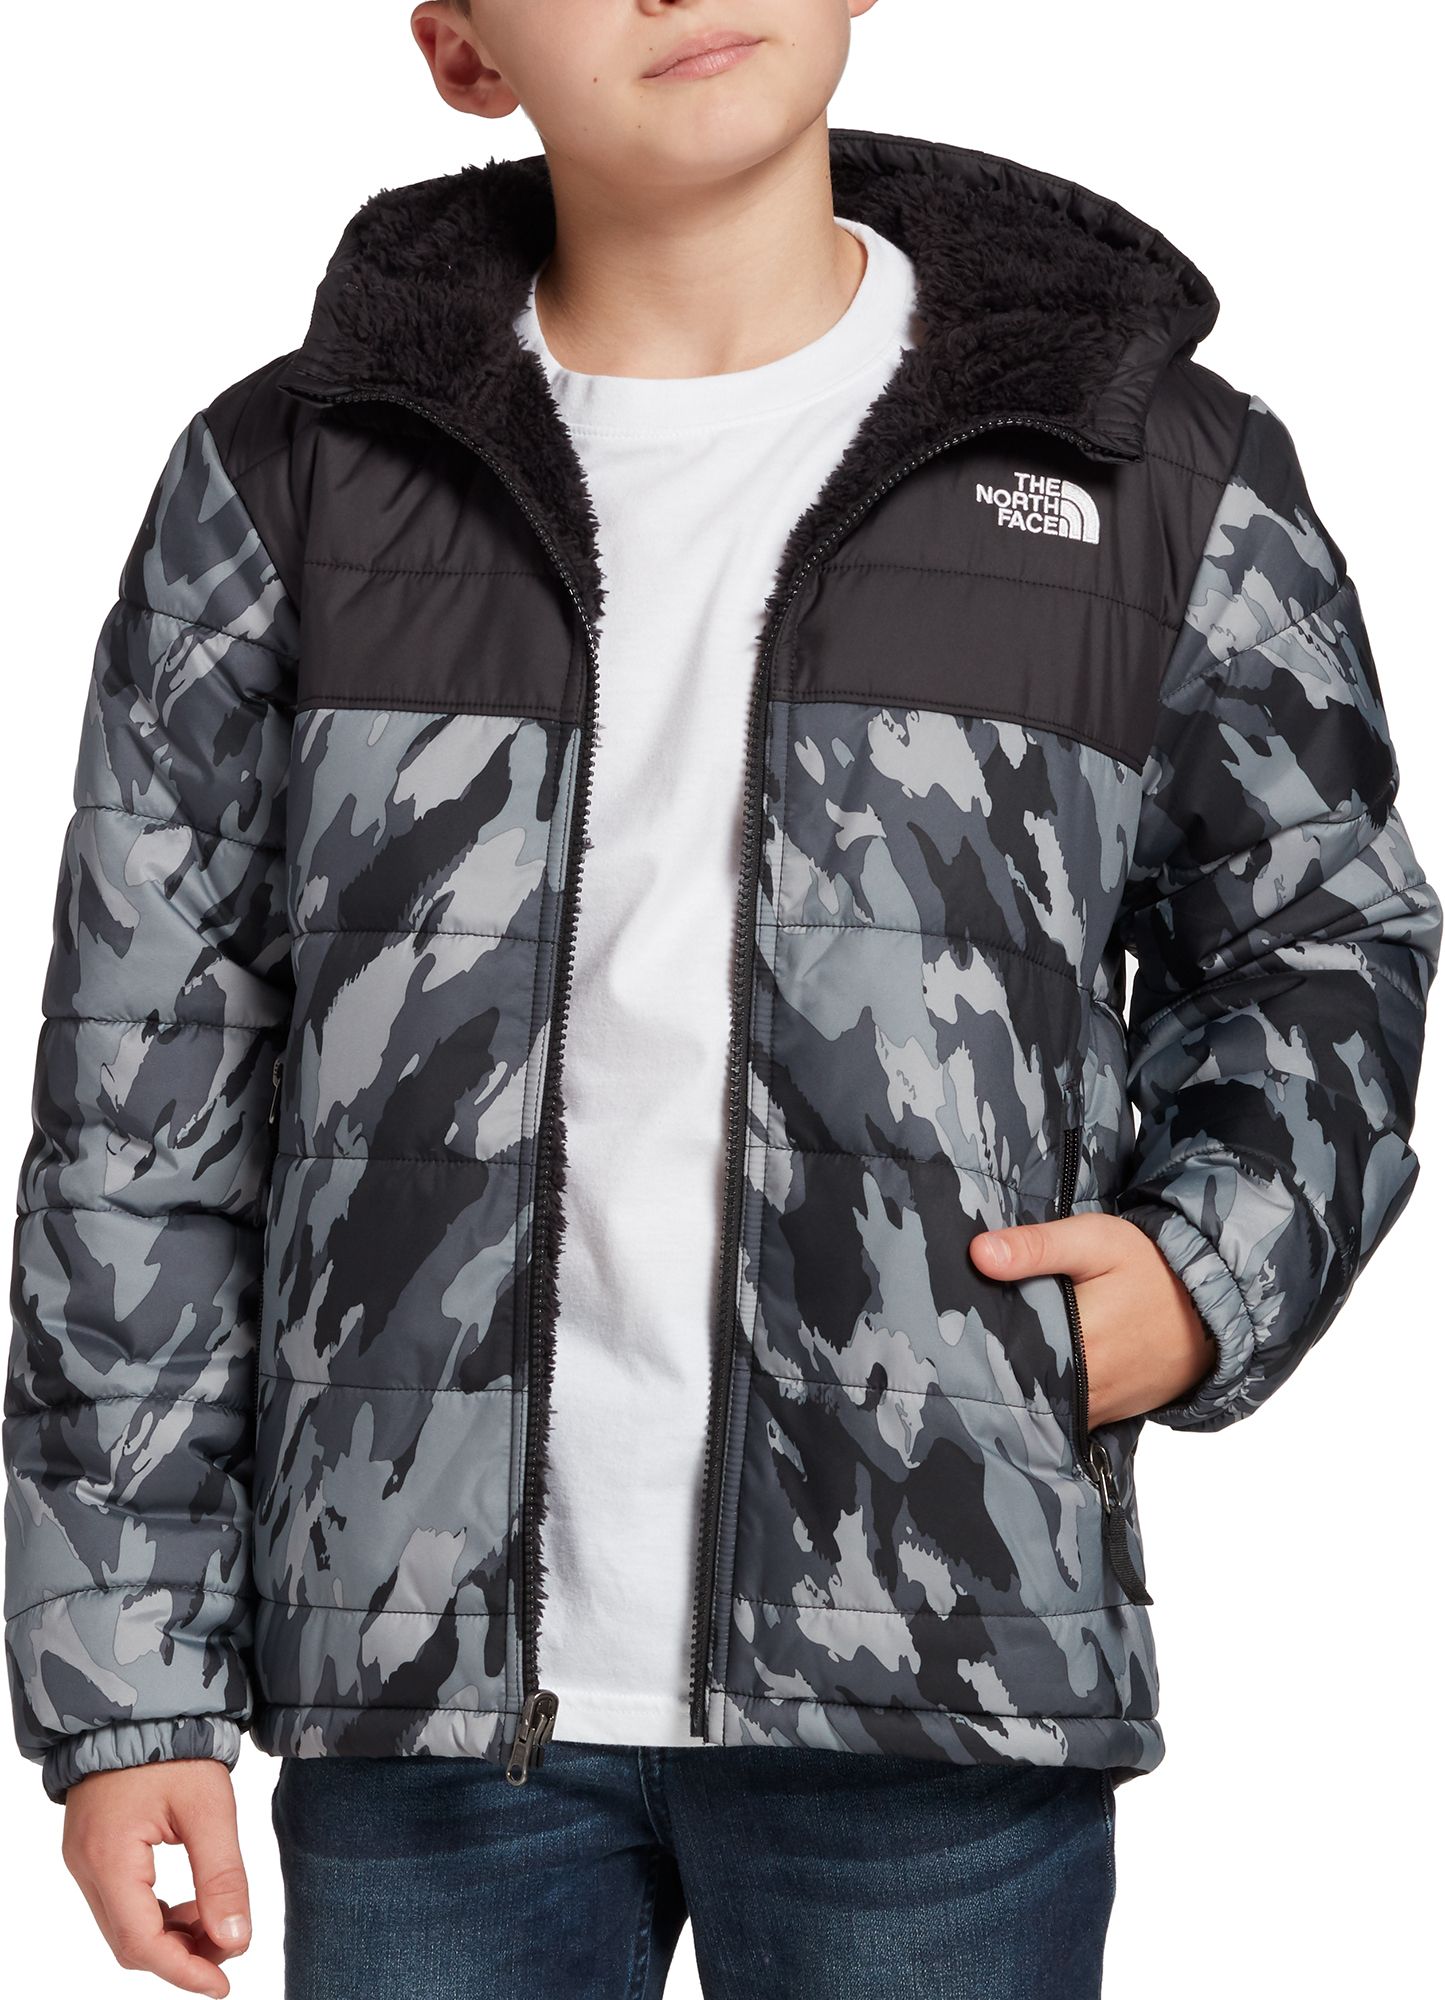 Kids' The North Face Jackets on Sale 